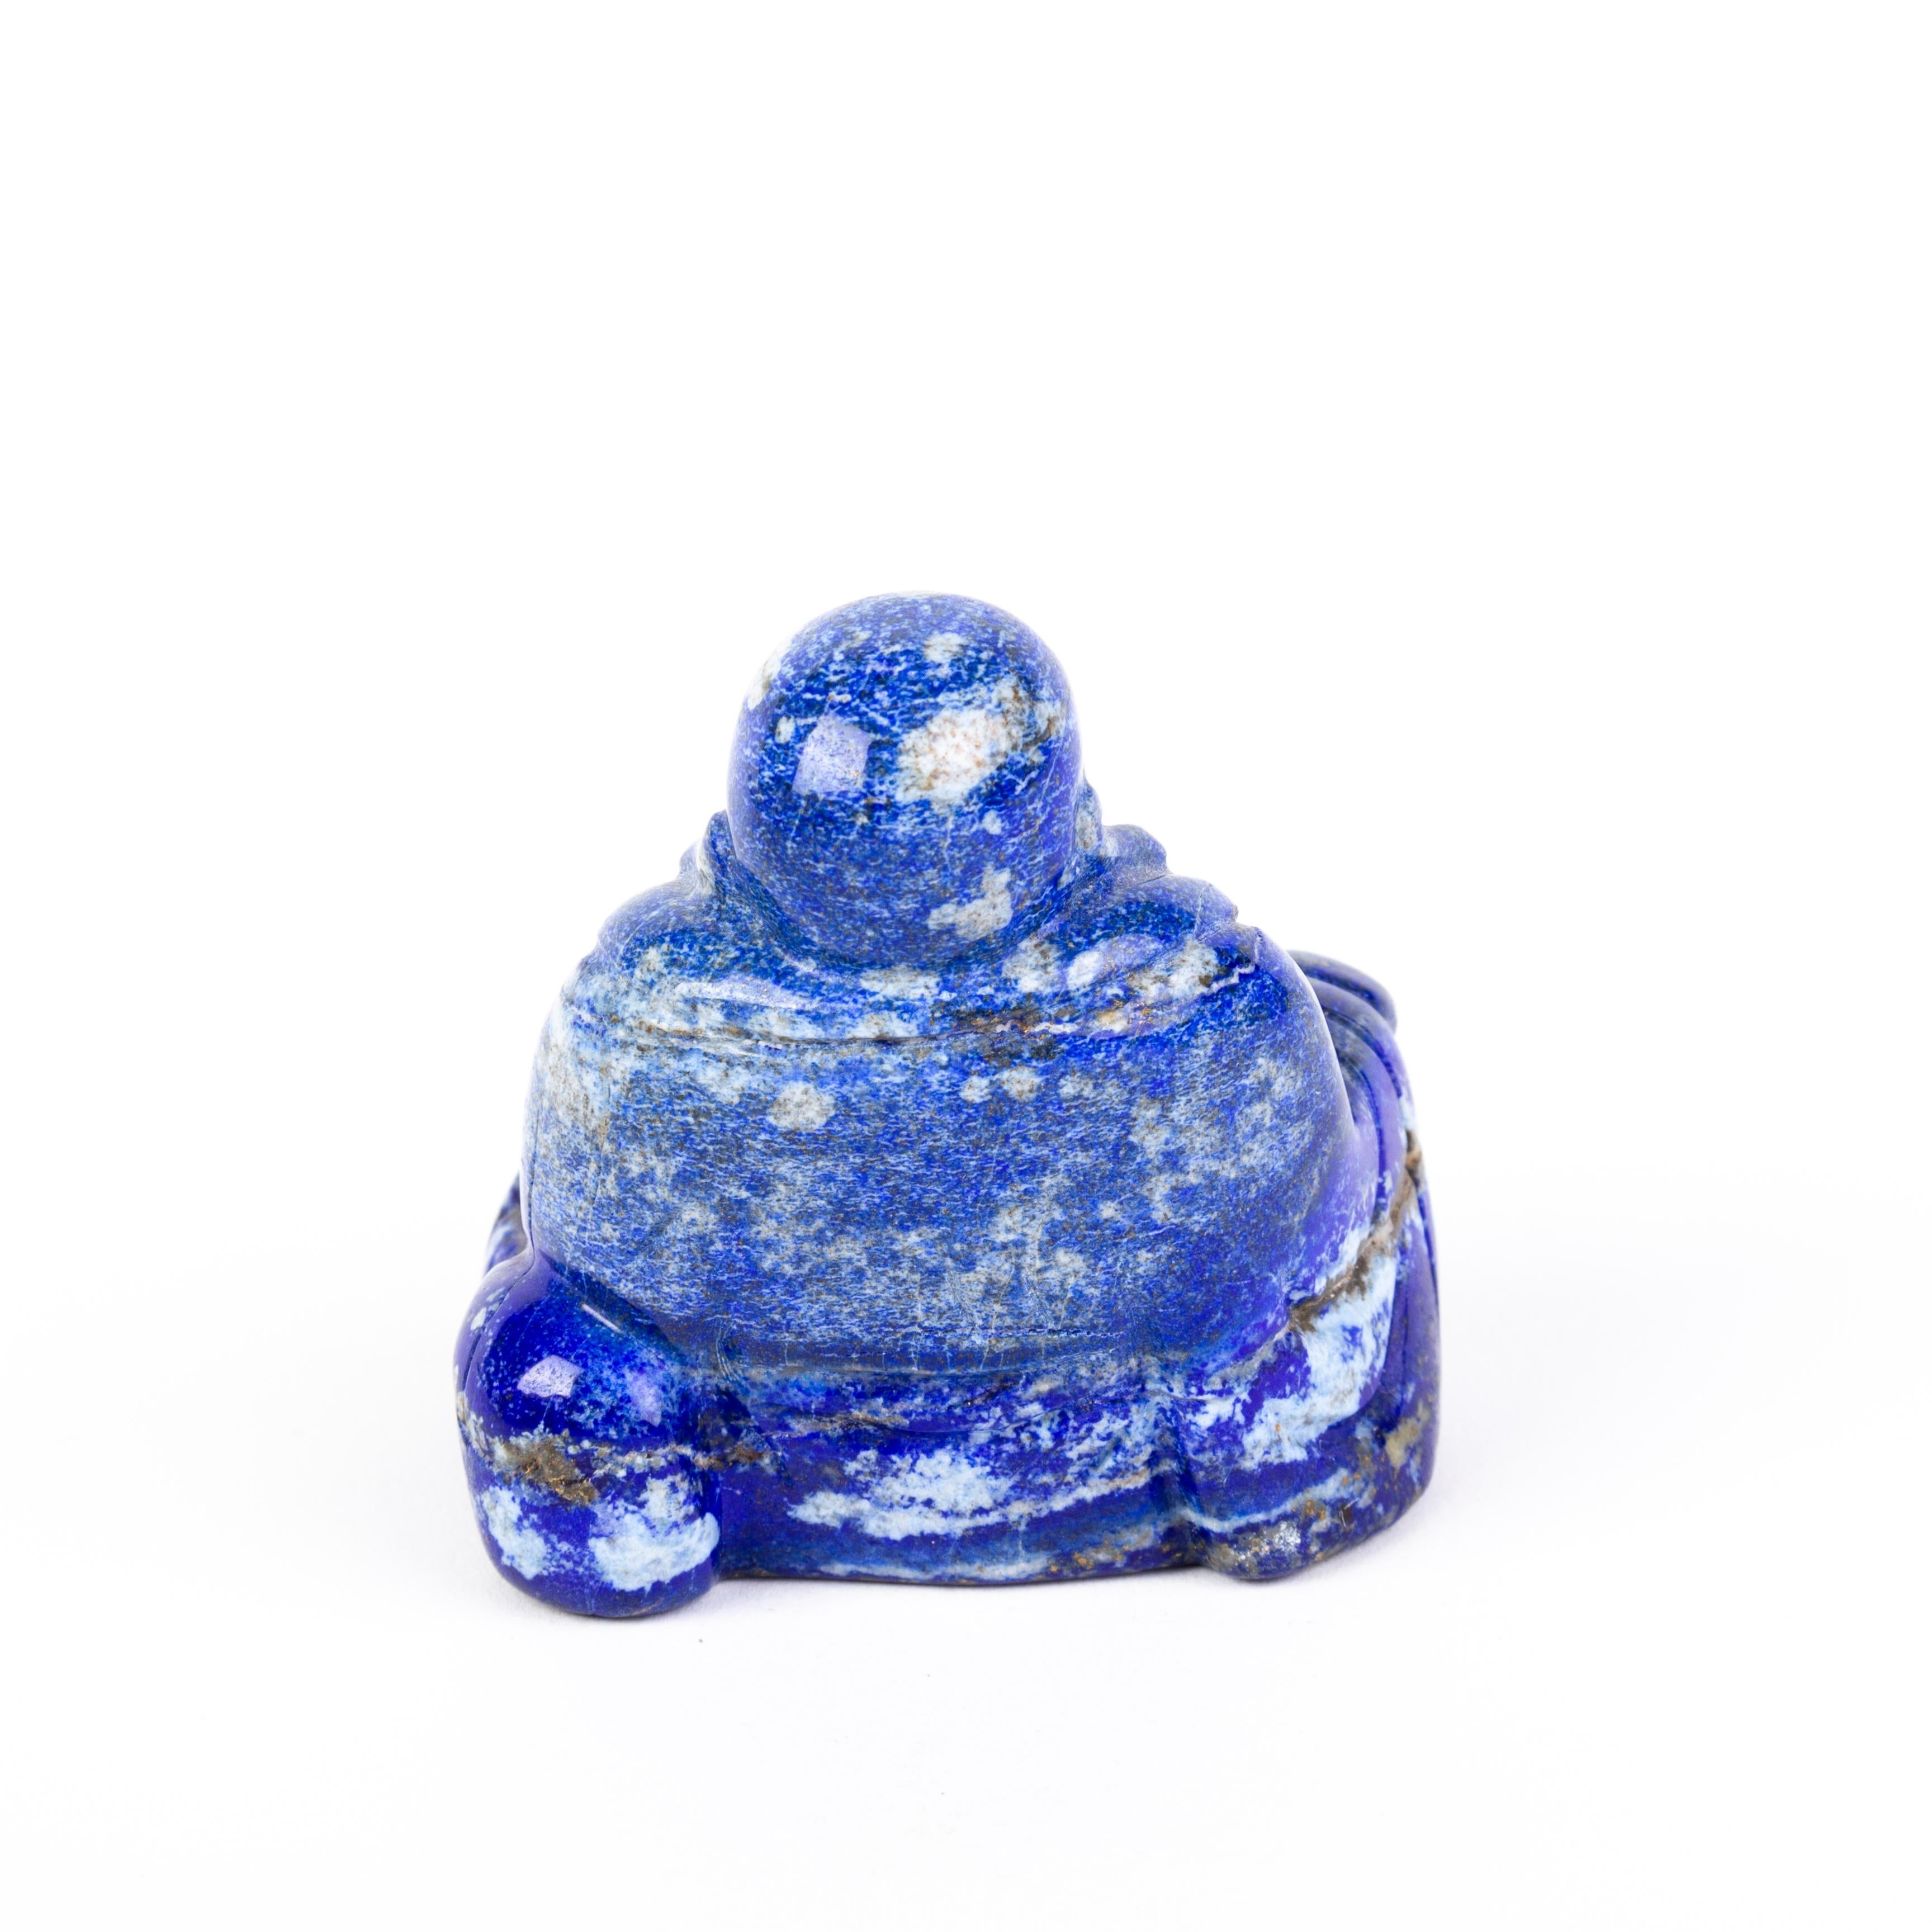 Hand-Carved Chinese Carved Lapis Lazuli Buddha Sculpture 